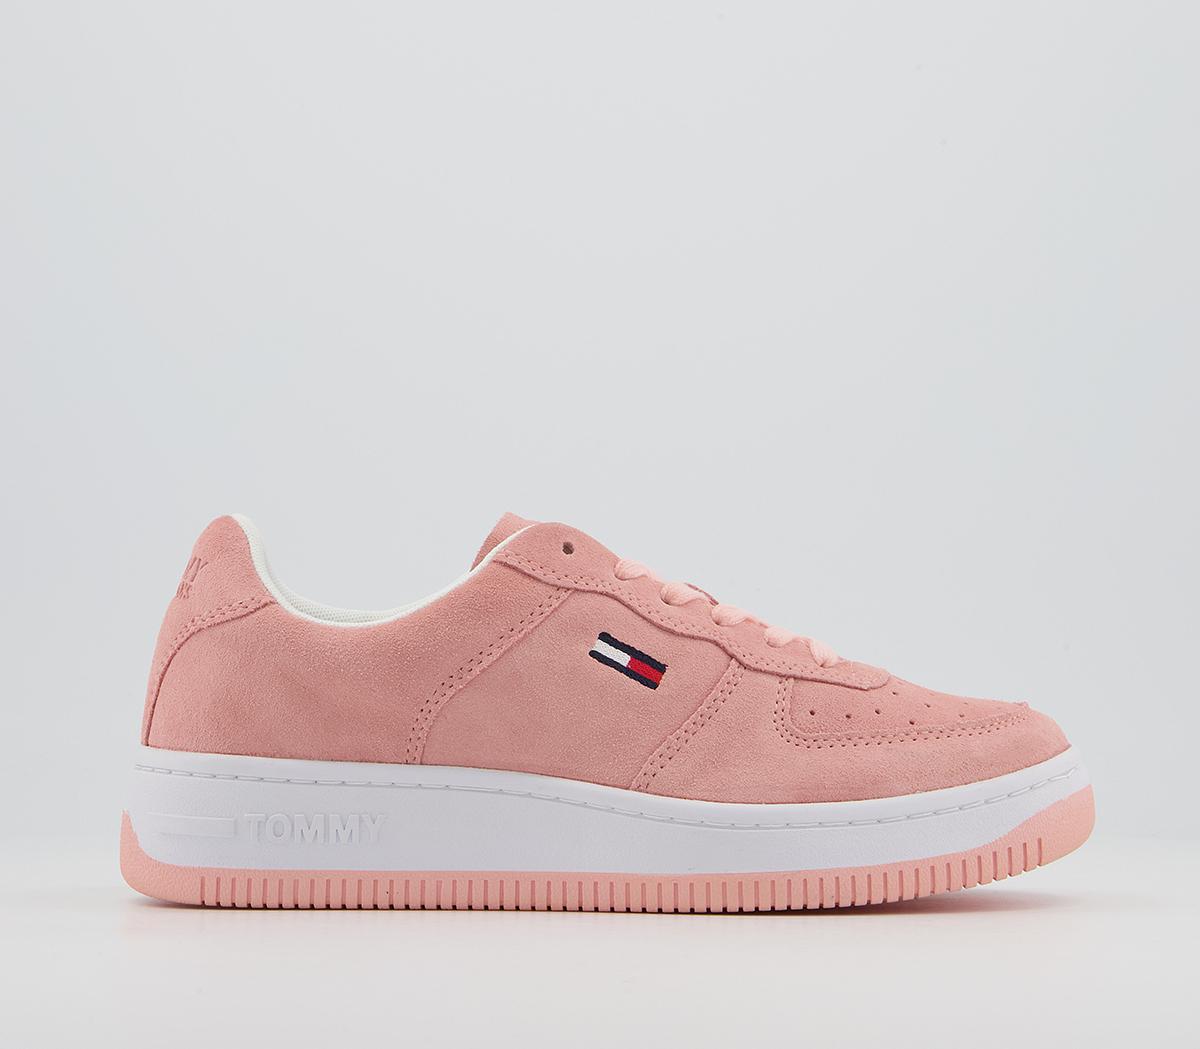 opladning Smadre Modtager Tommy Hilfiger Basket Sneakers Pink - Women's Trainers